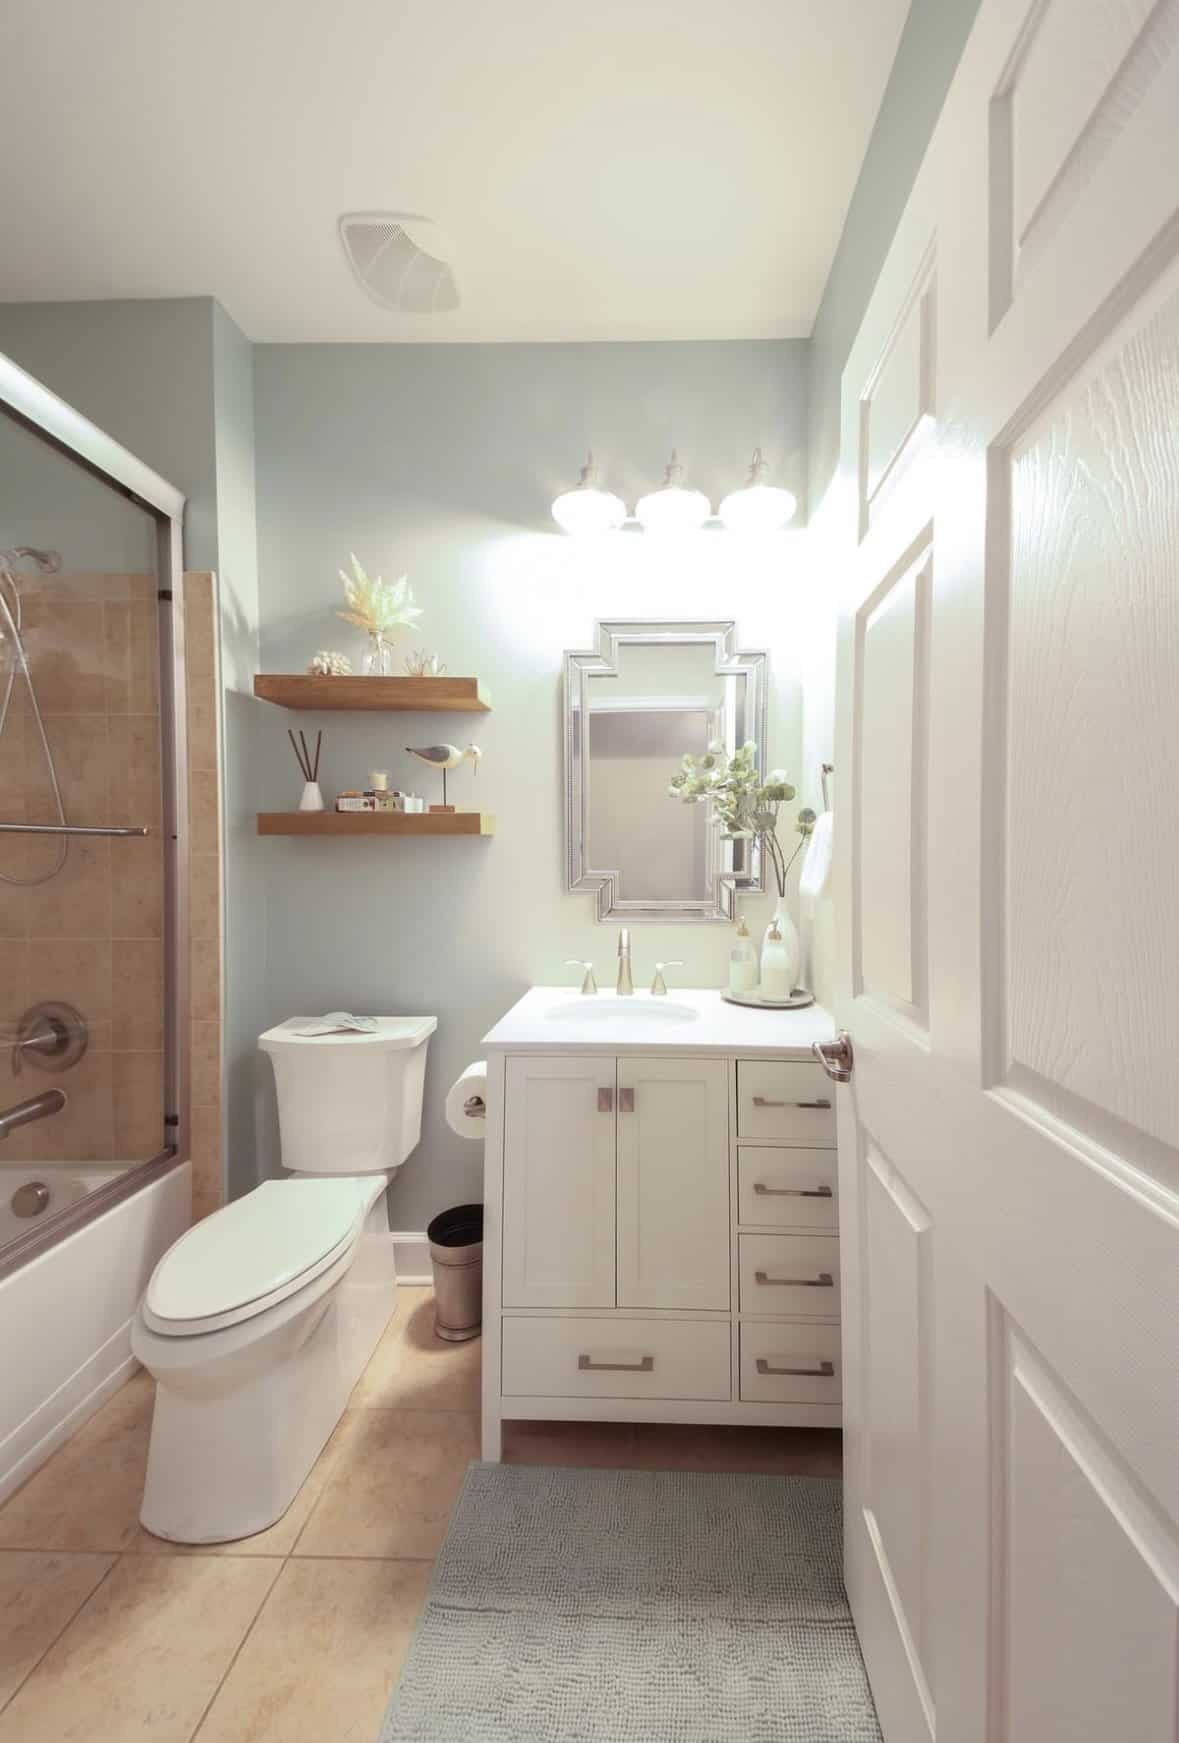 Stunning bathroom makeovers by skilled house painters in Chesapeake, VA.